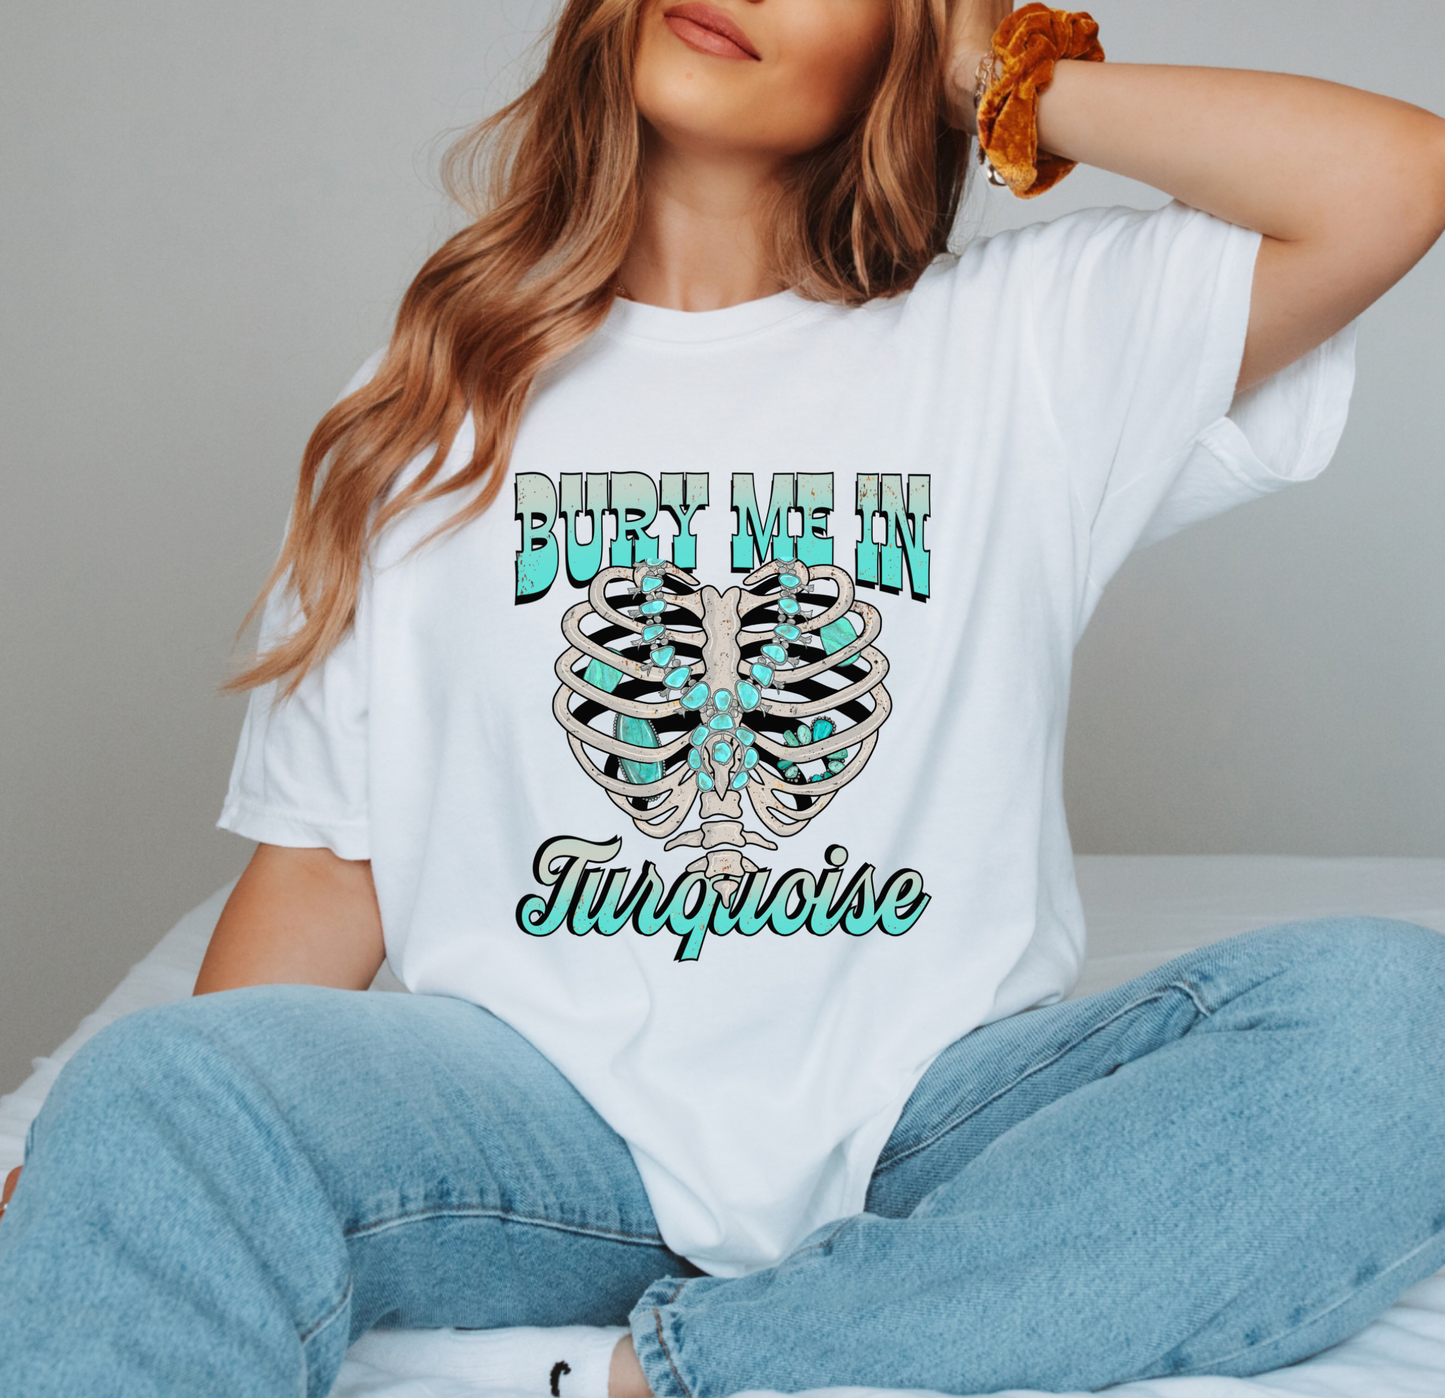 Bury Me In Turquoise Graphic Top